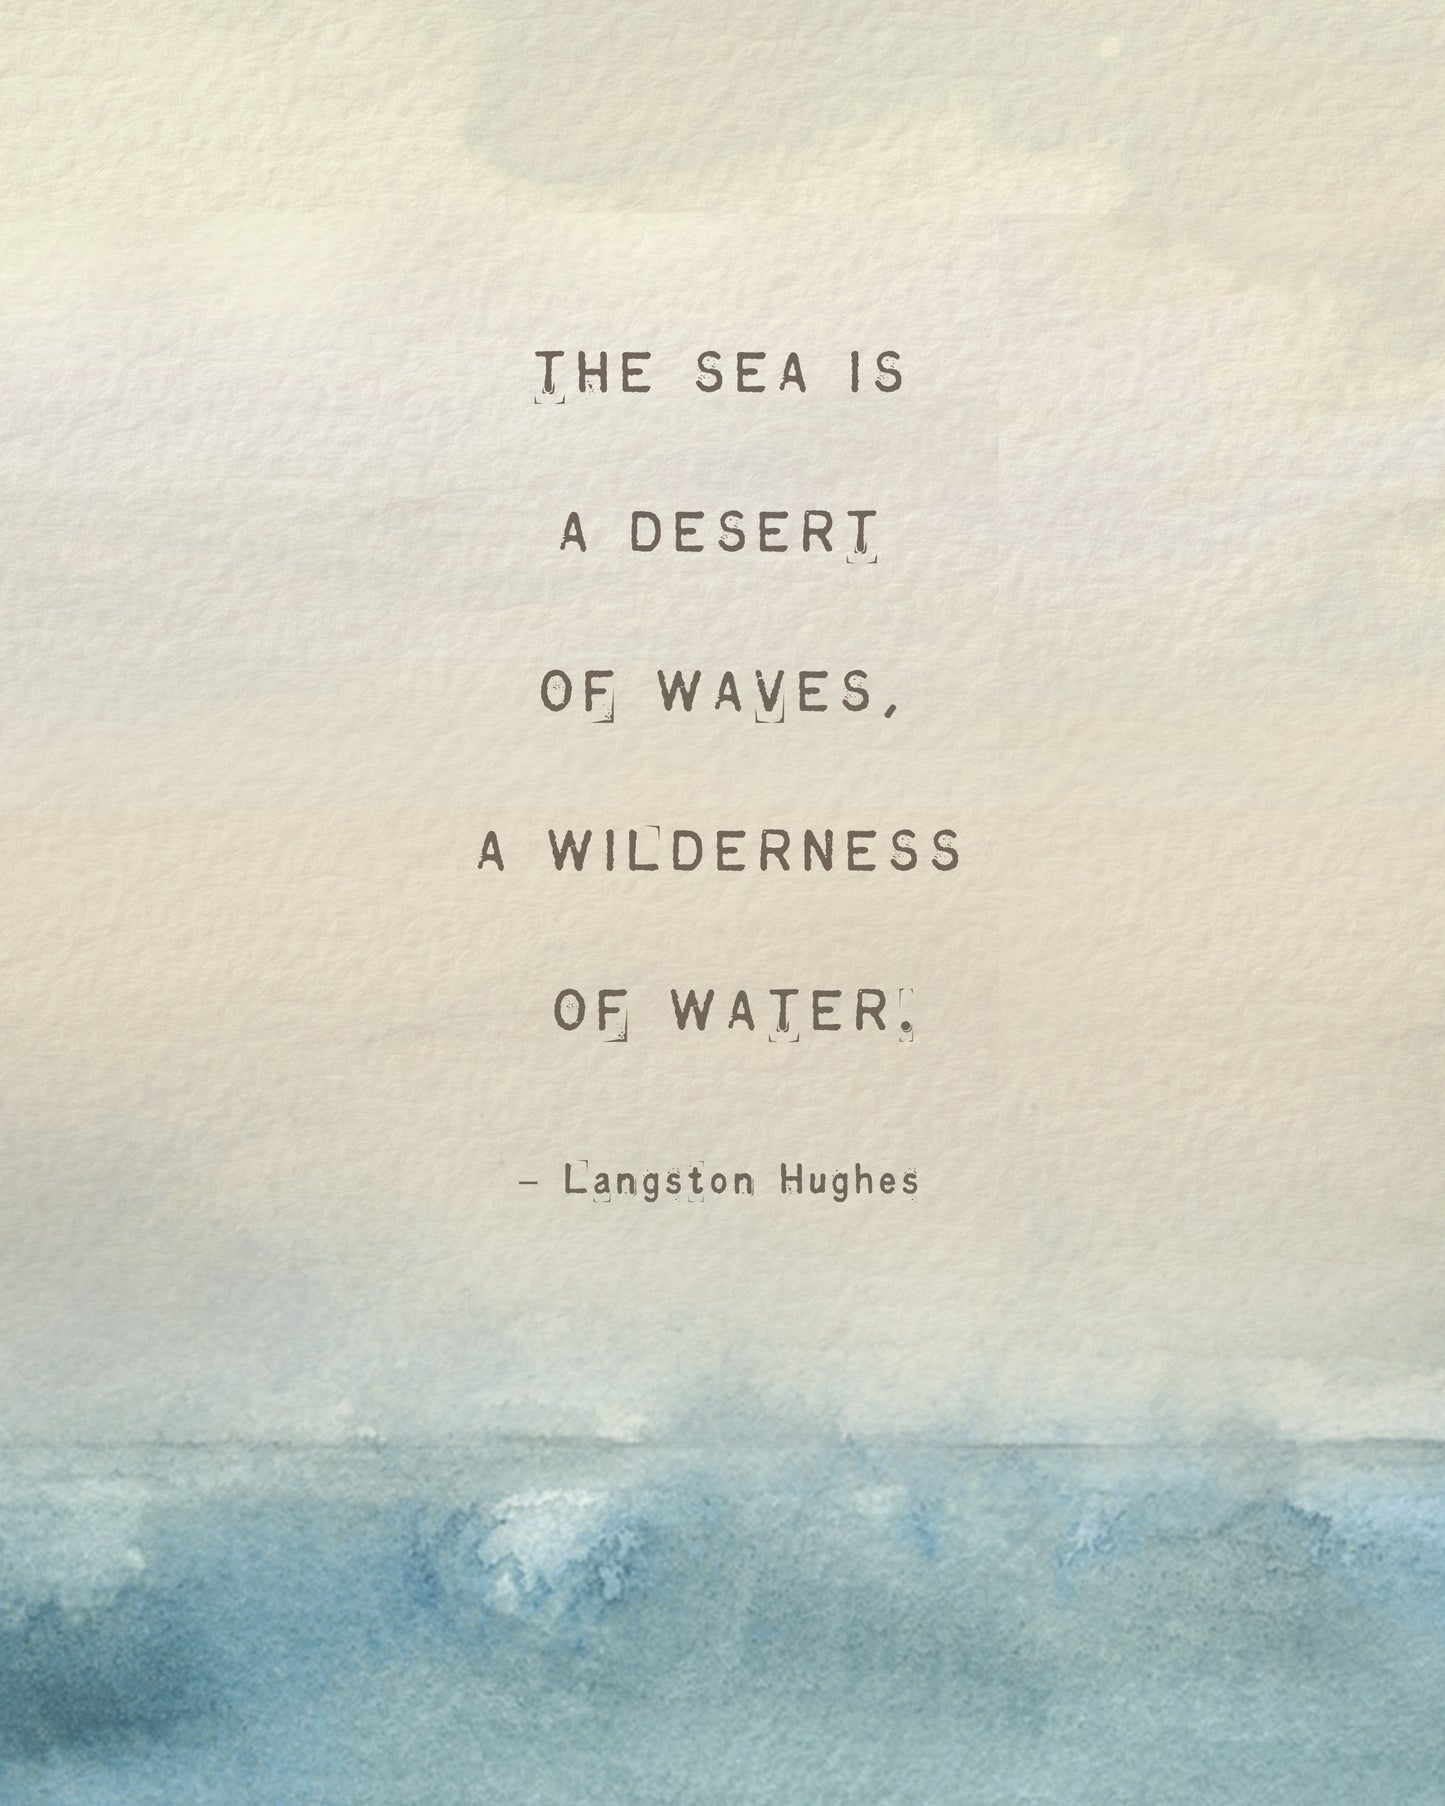 Langston Hughes poetry art "The Sea is a Desert of Waves..." nature wall art